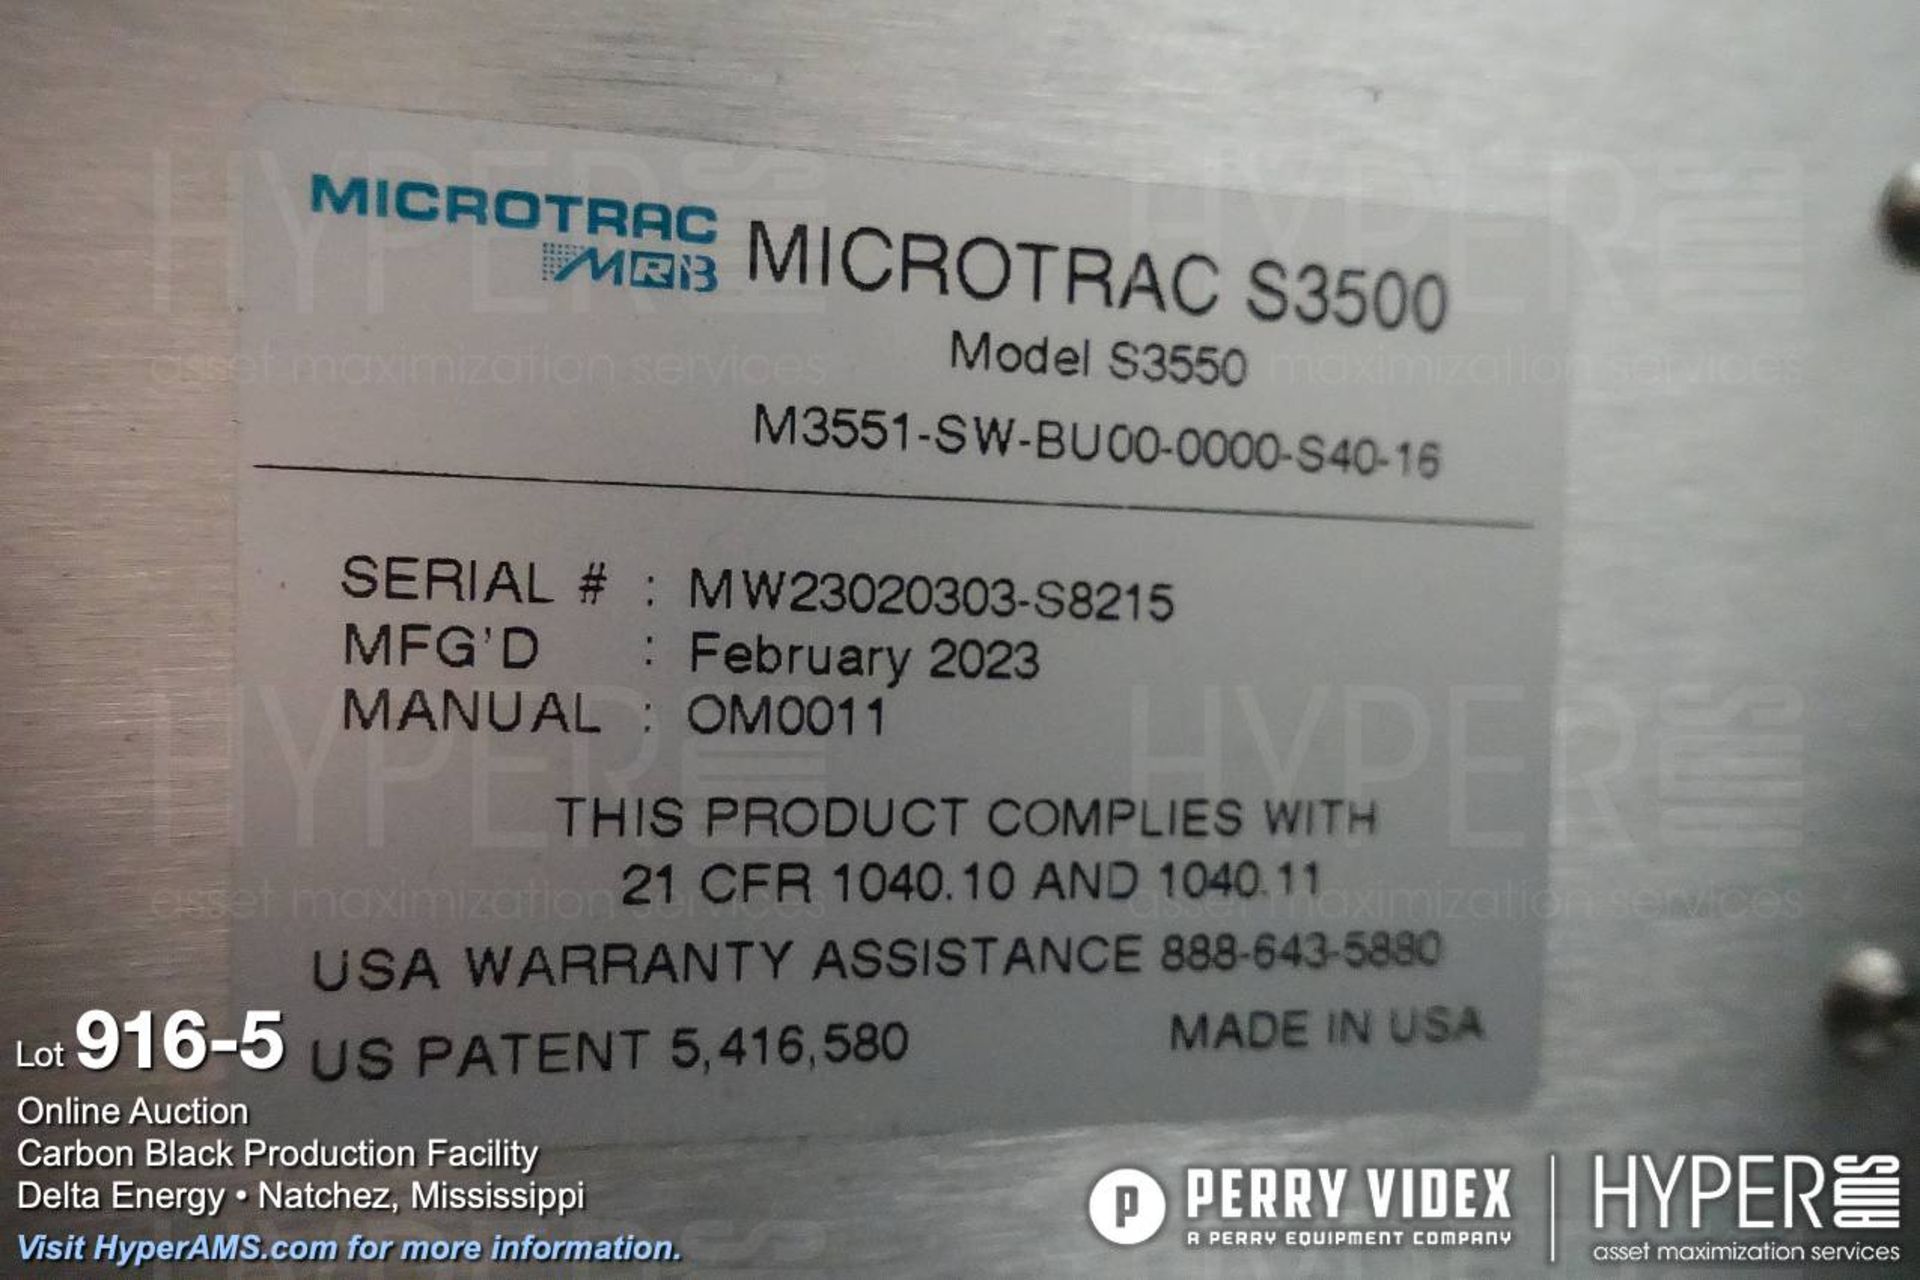 Microtrac MRB S3500 laser diffraction particle size analyzer (NEW IN 2023!) - Image 5 of 7